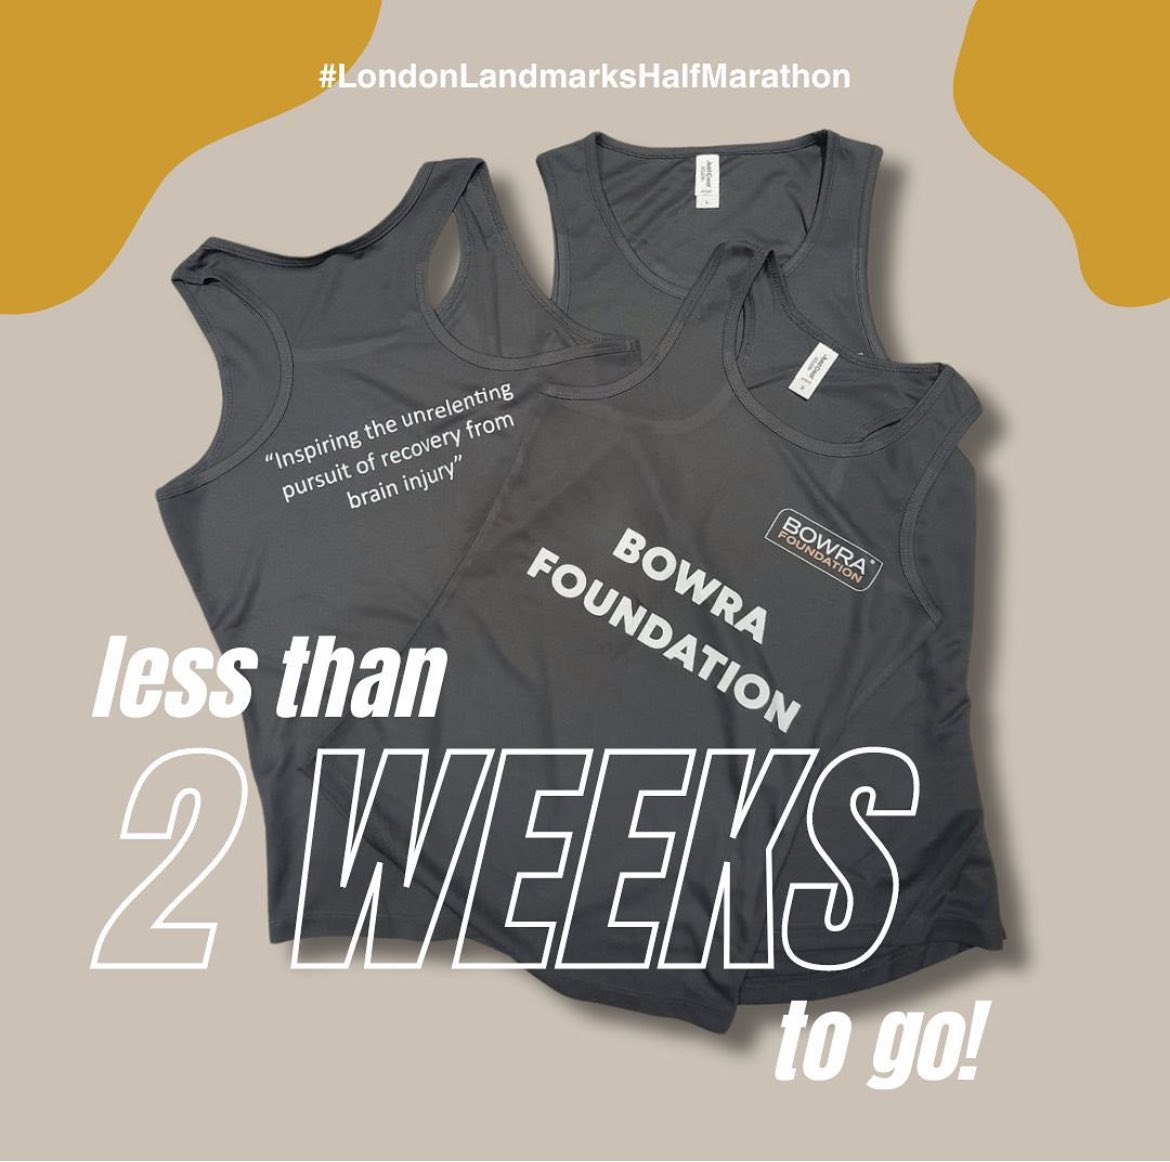 I’m running the @LLHalf on 7th April for @BowraFoundation - despite having done ultramarathons, I’ve never done a half marathon-waaaay outside my comfort zone 🤣 please support if you can justgiving.com/campaign/bowra…